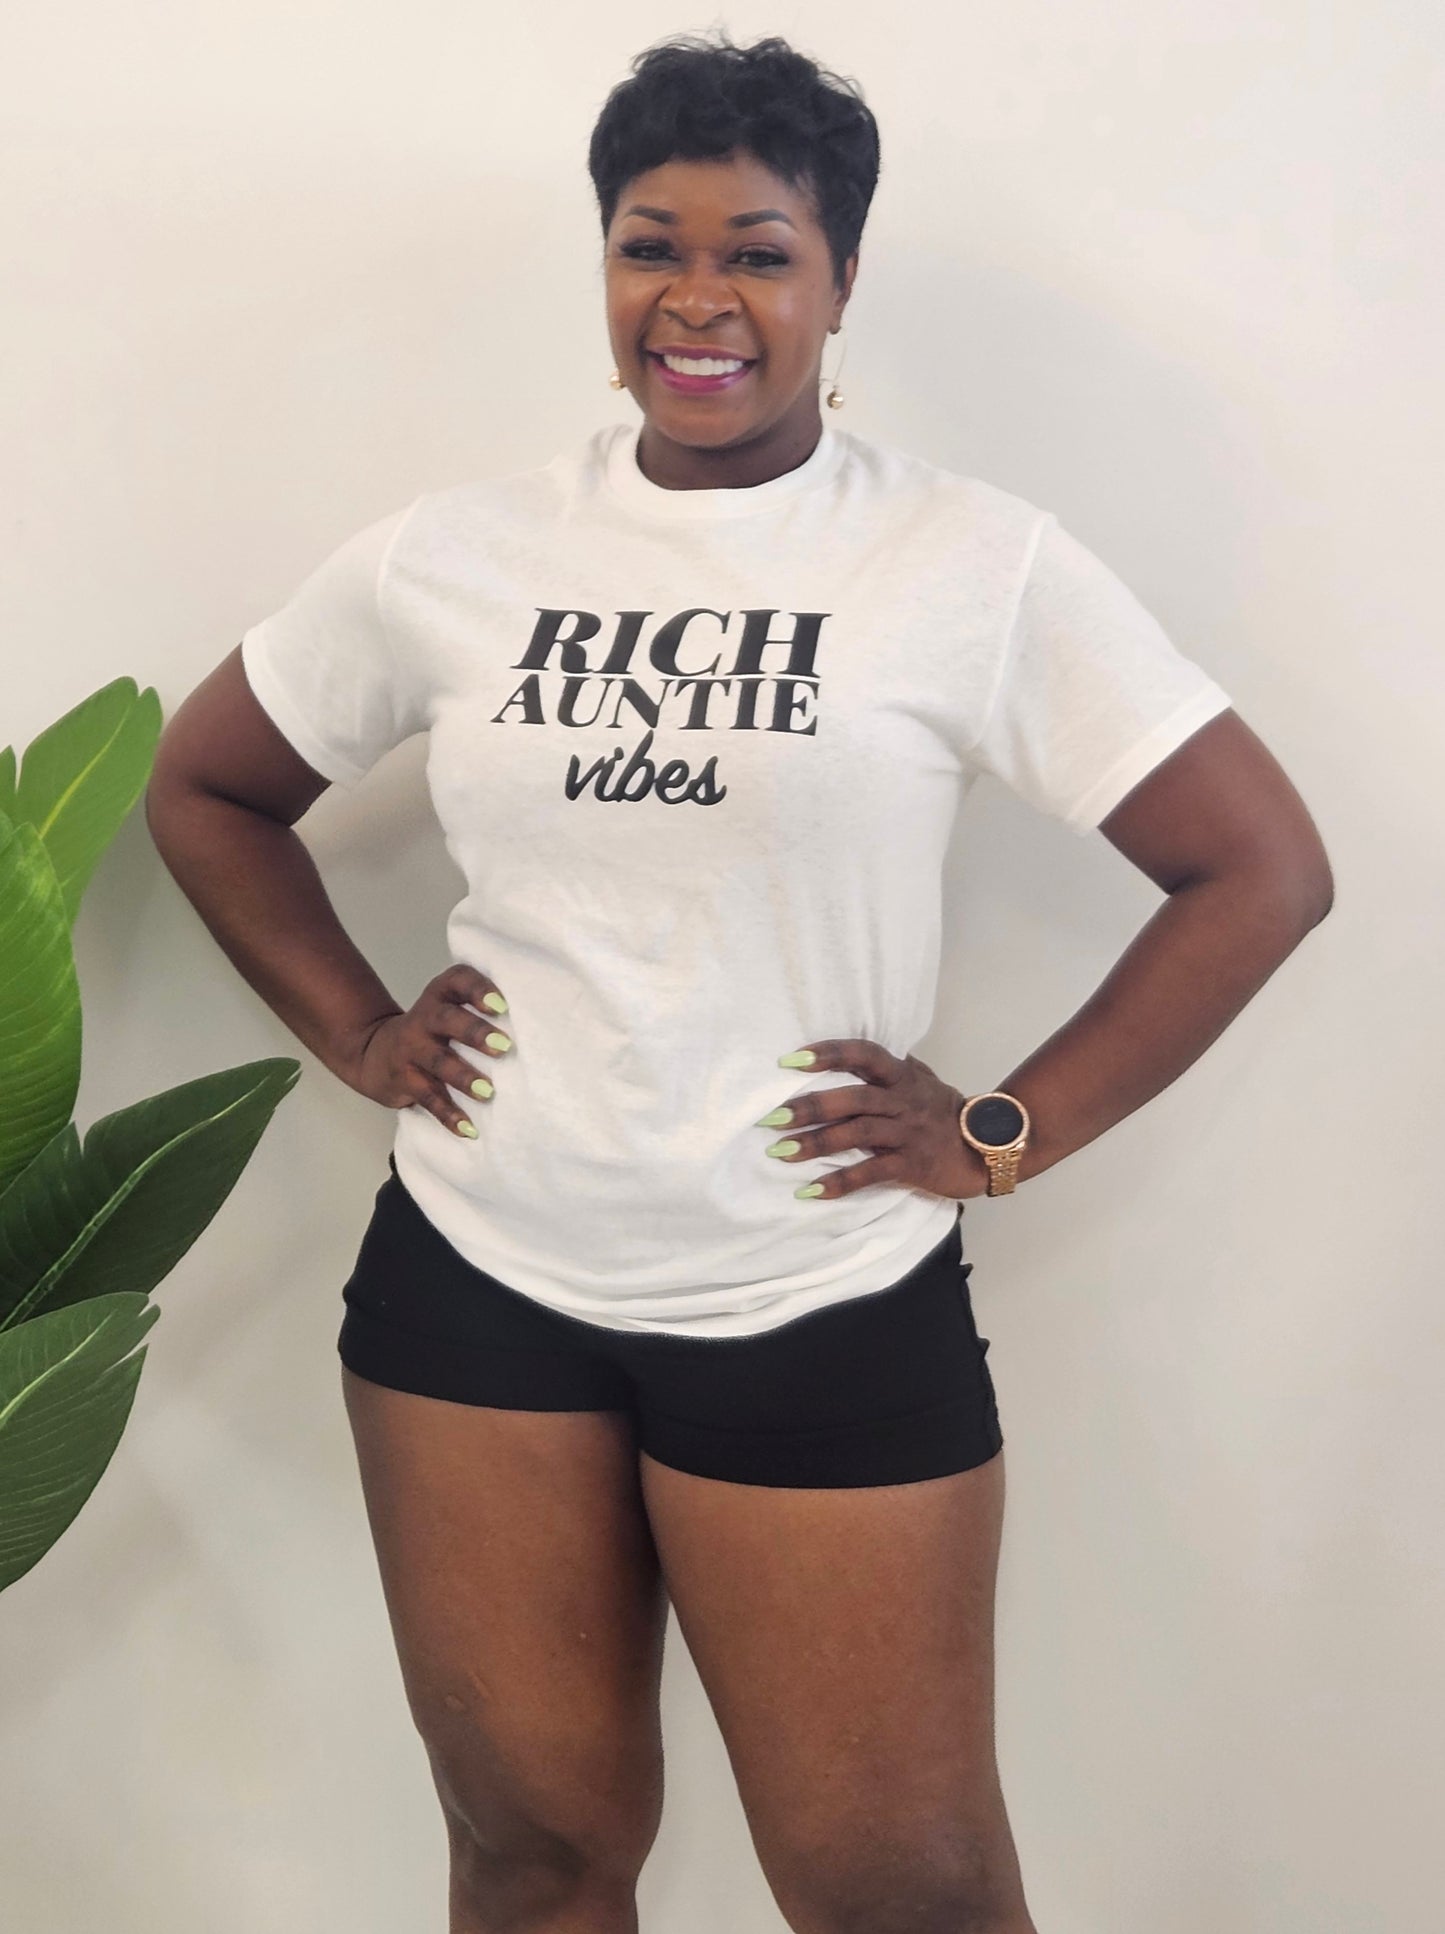 Rich Auntie Vibes T-Shirt